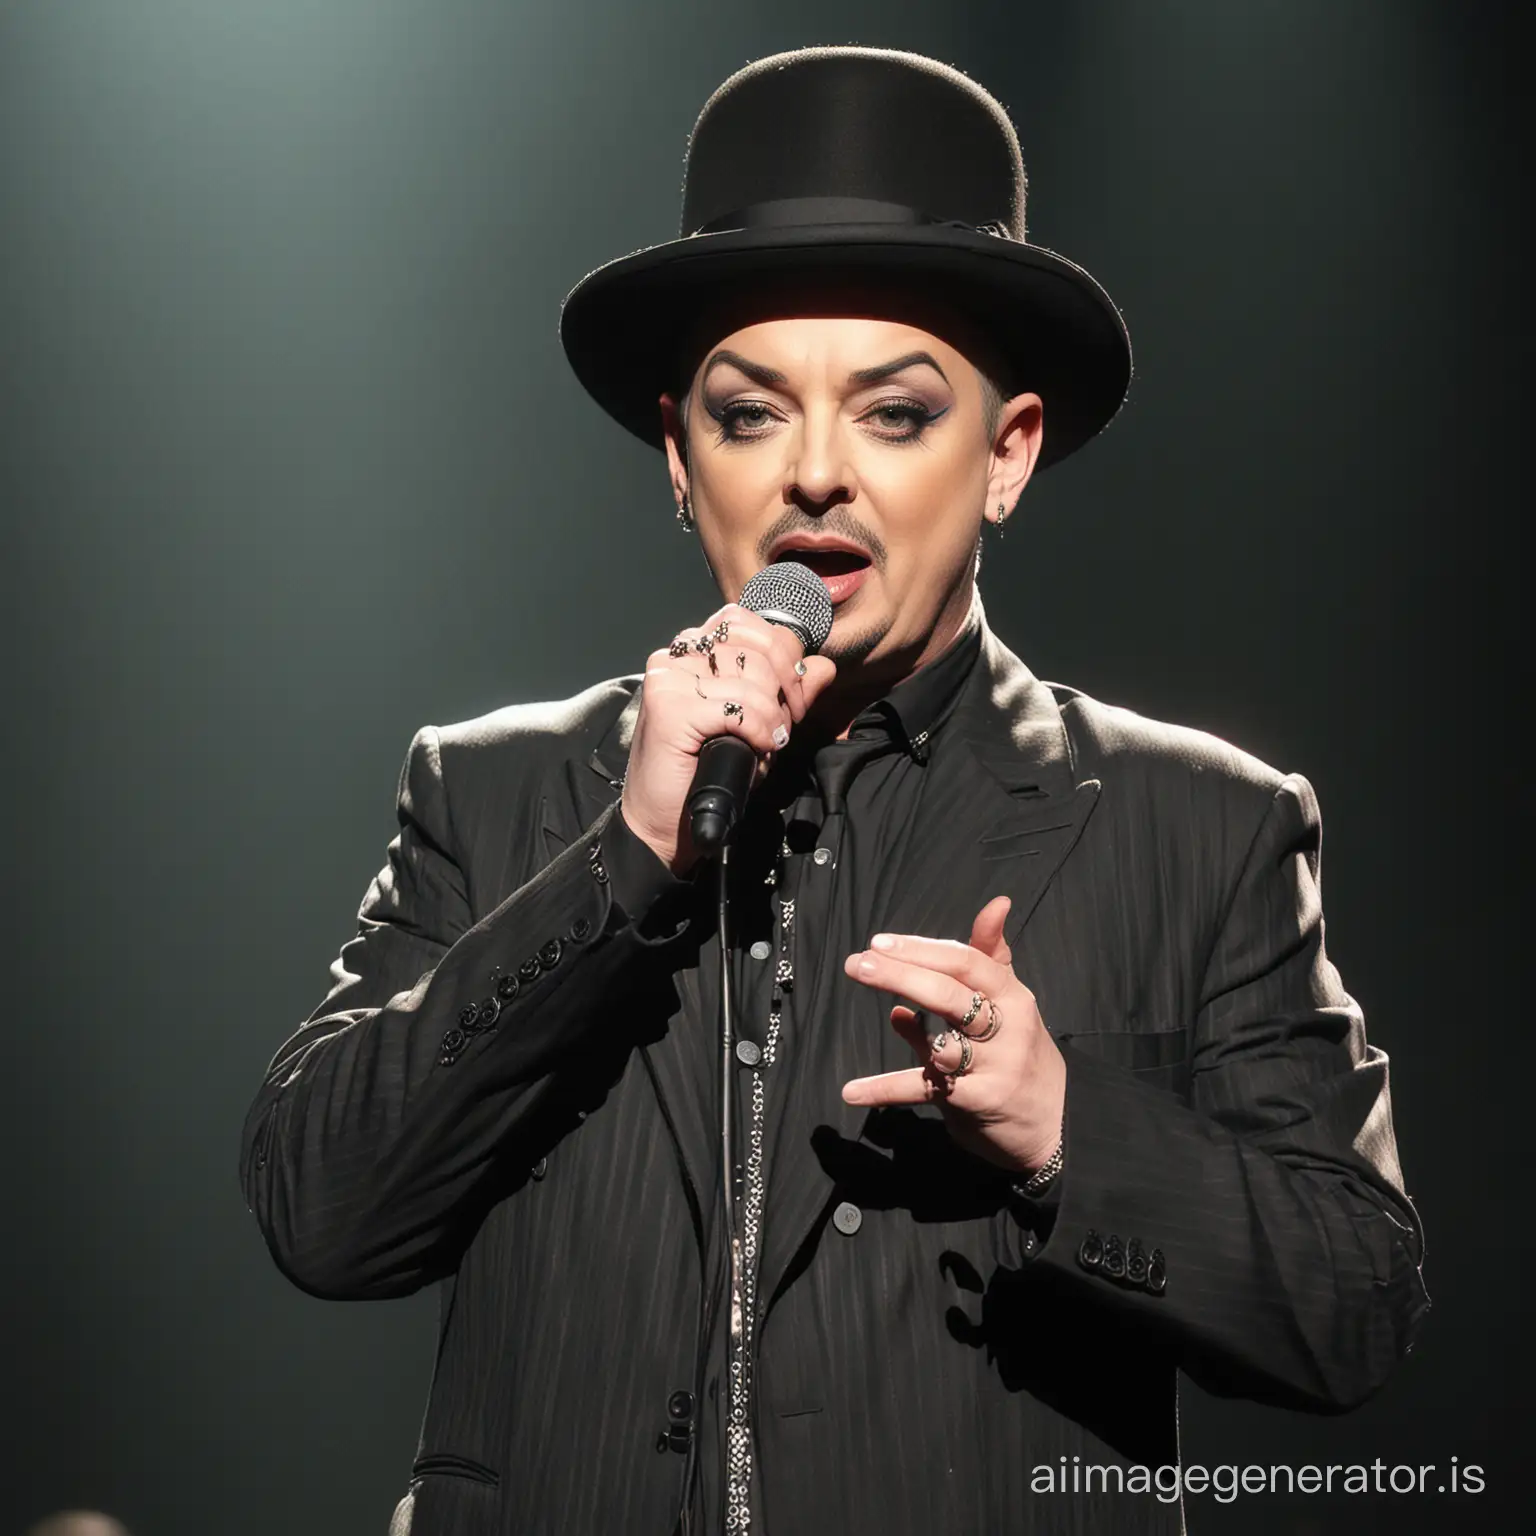 Boy-George-Performing-Live-on-Stage-in-London